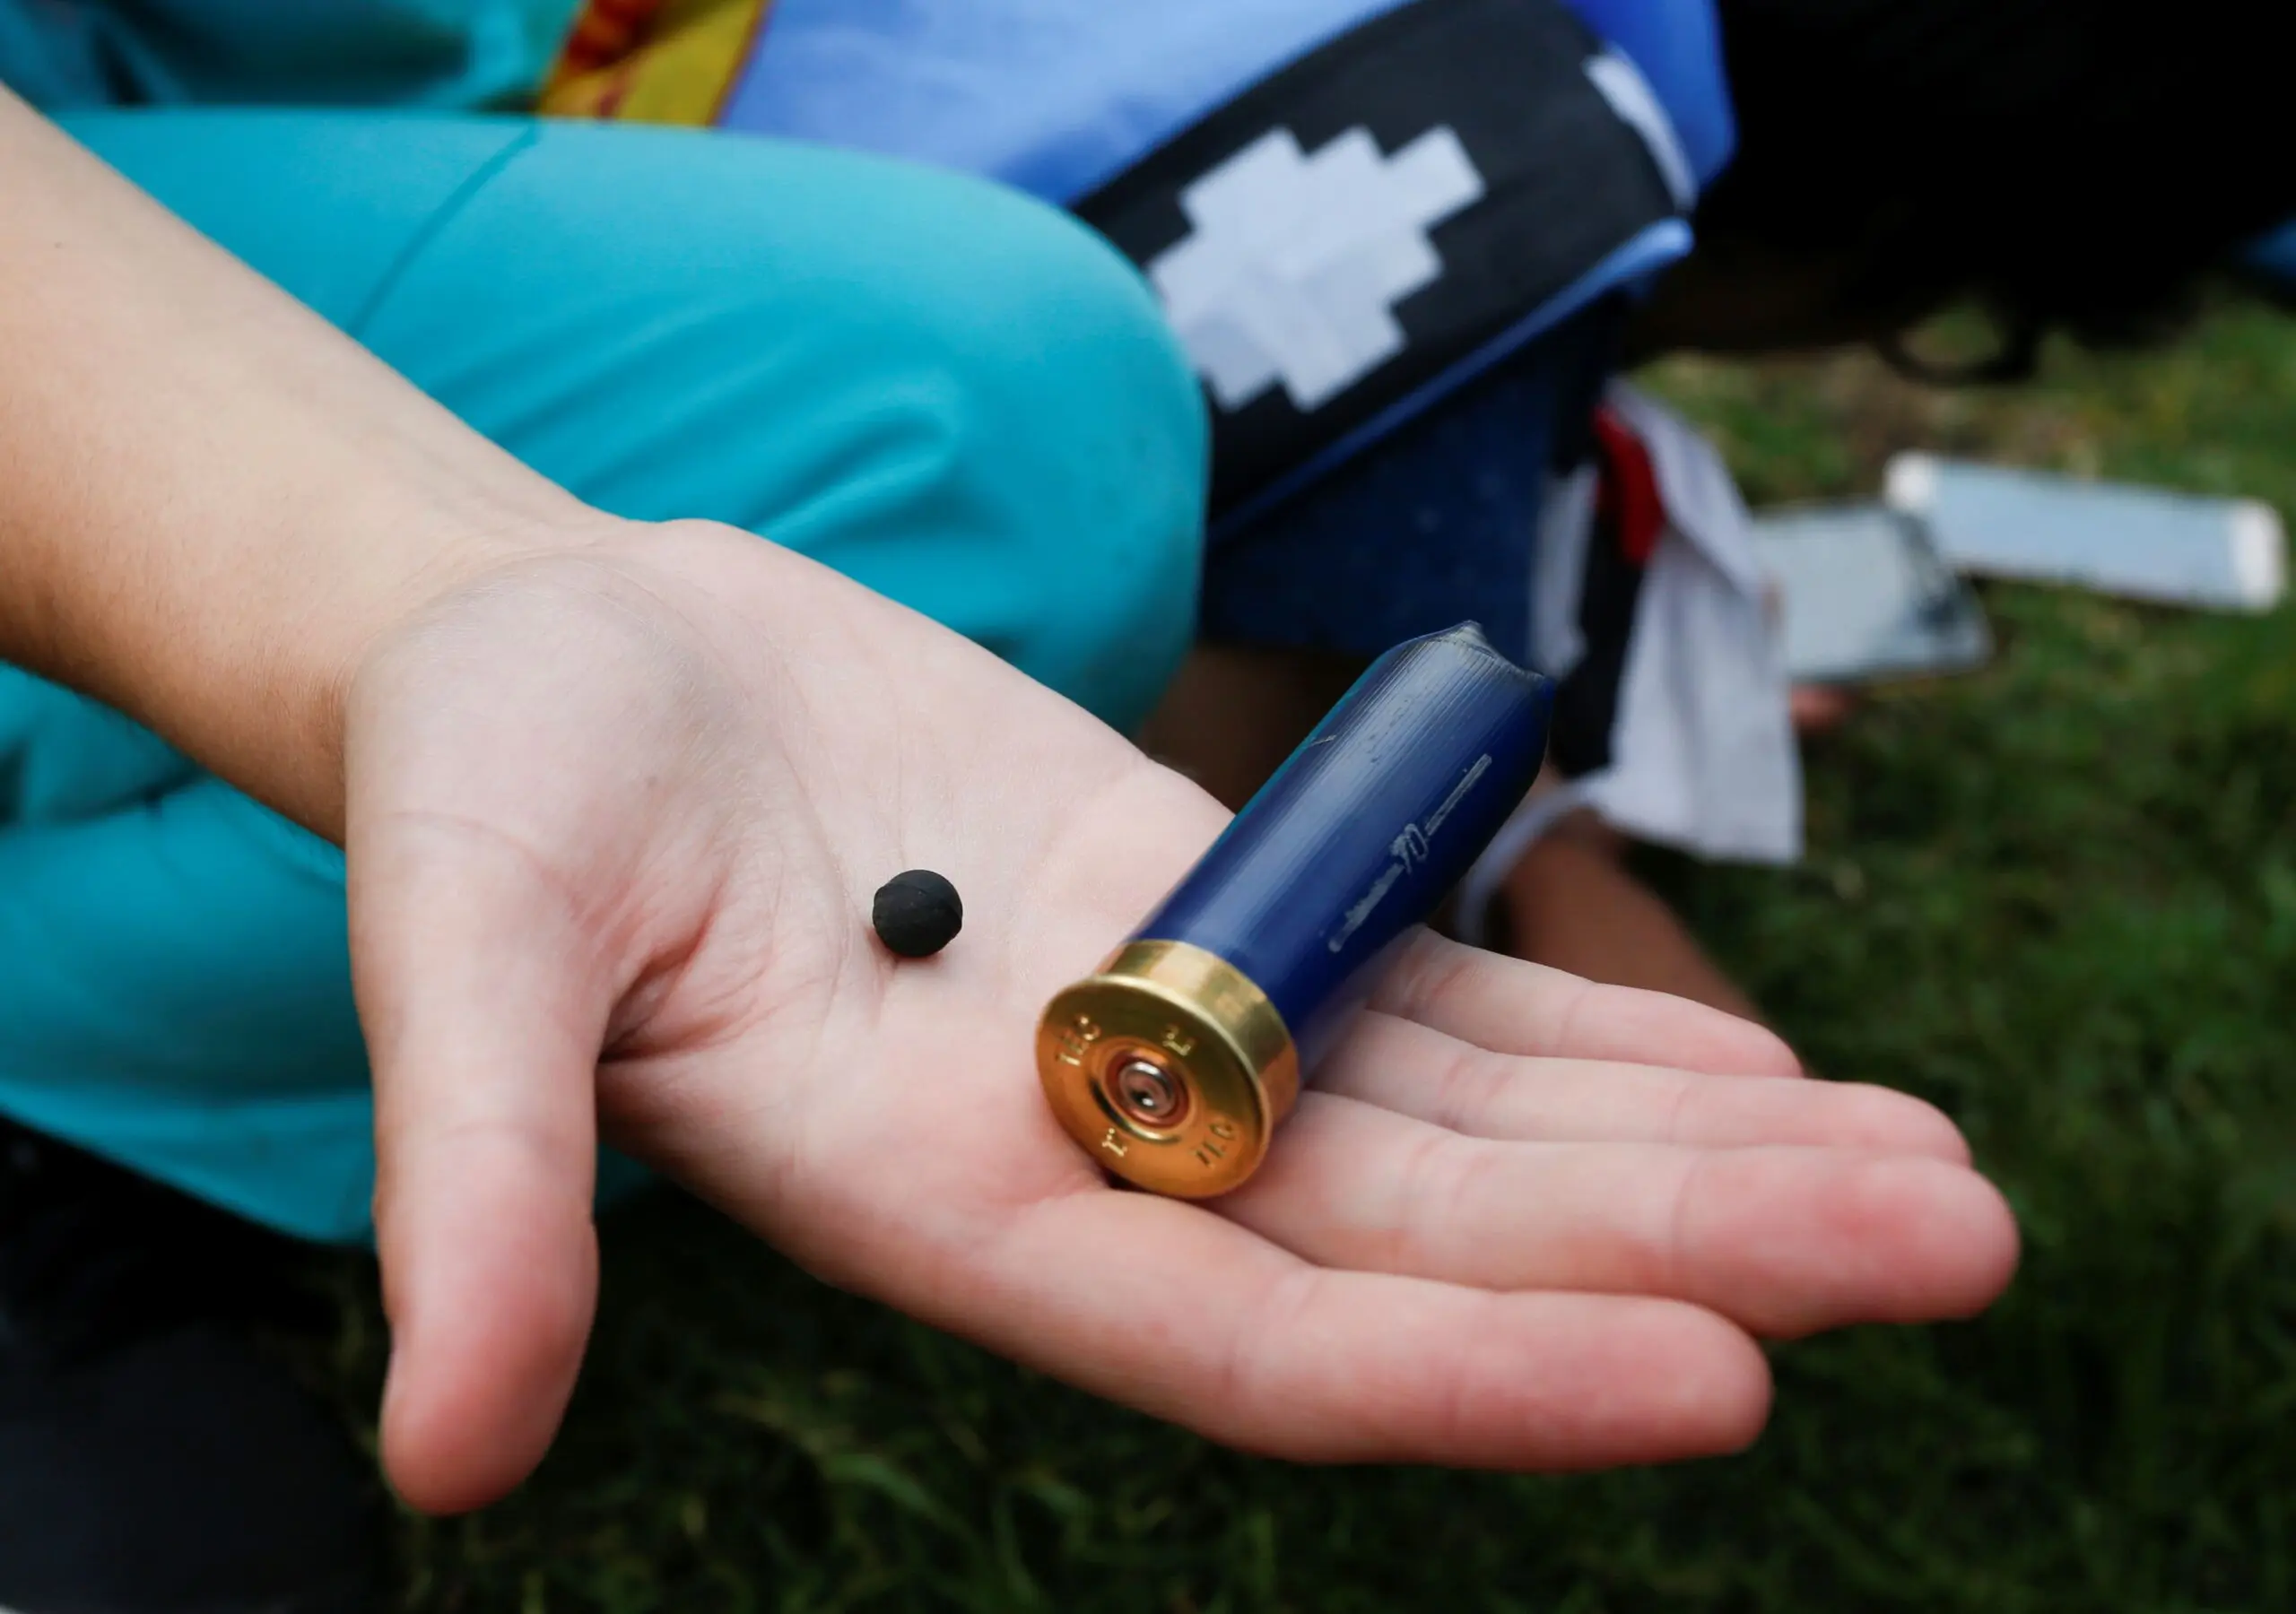 A protester displays a pellet and a spent casing that they are fired from.